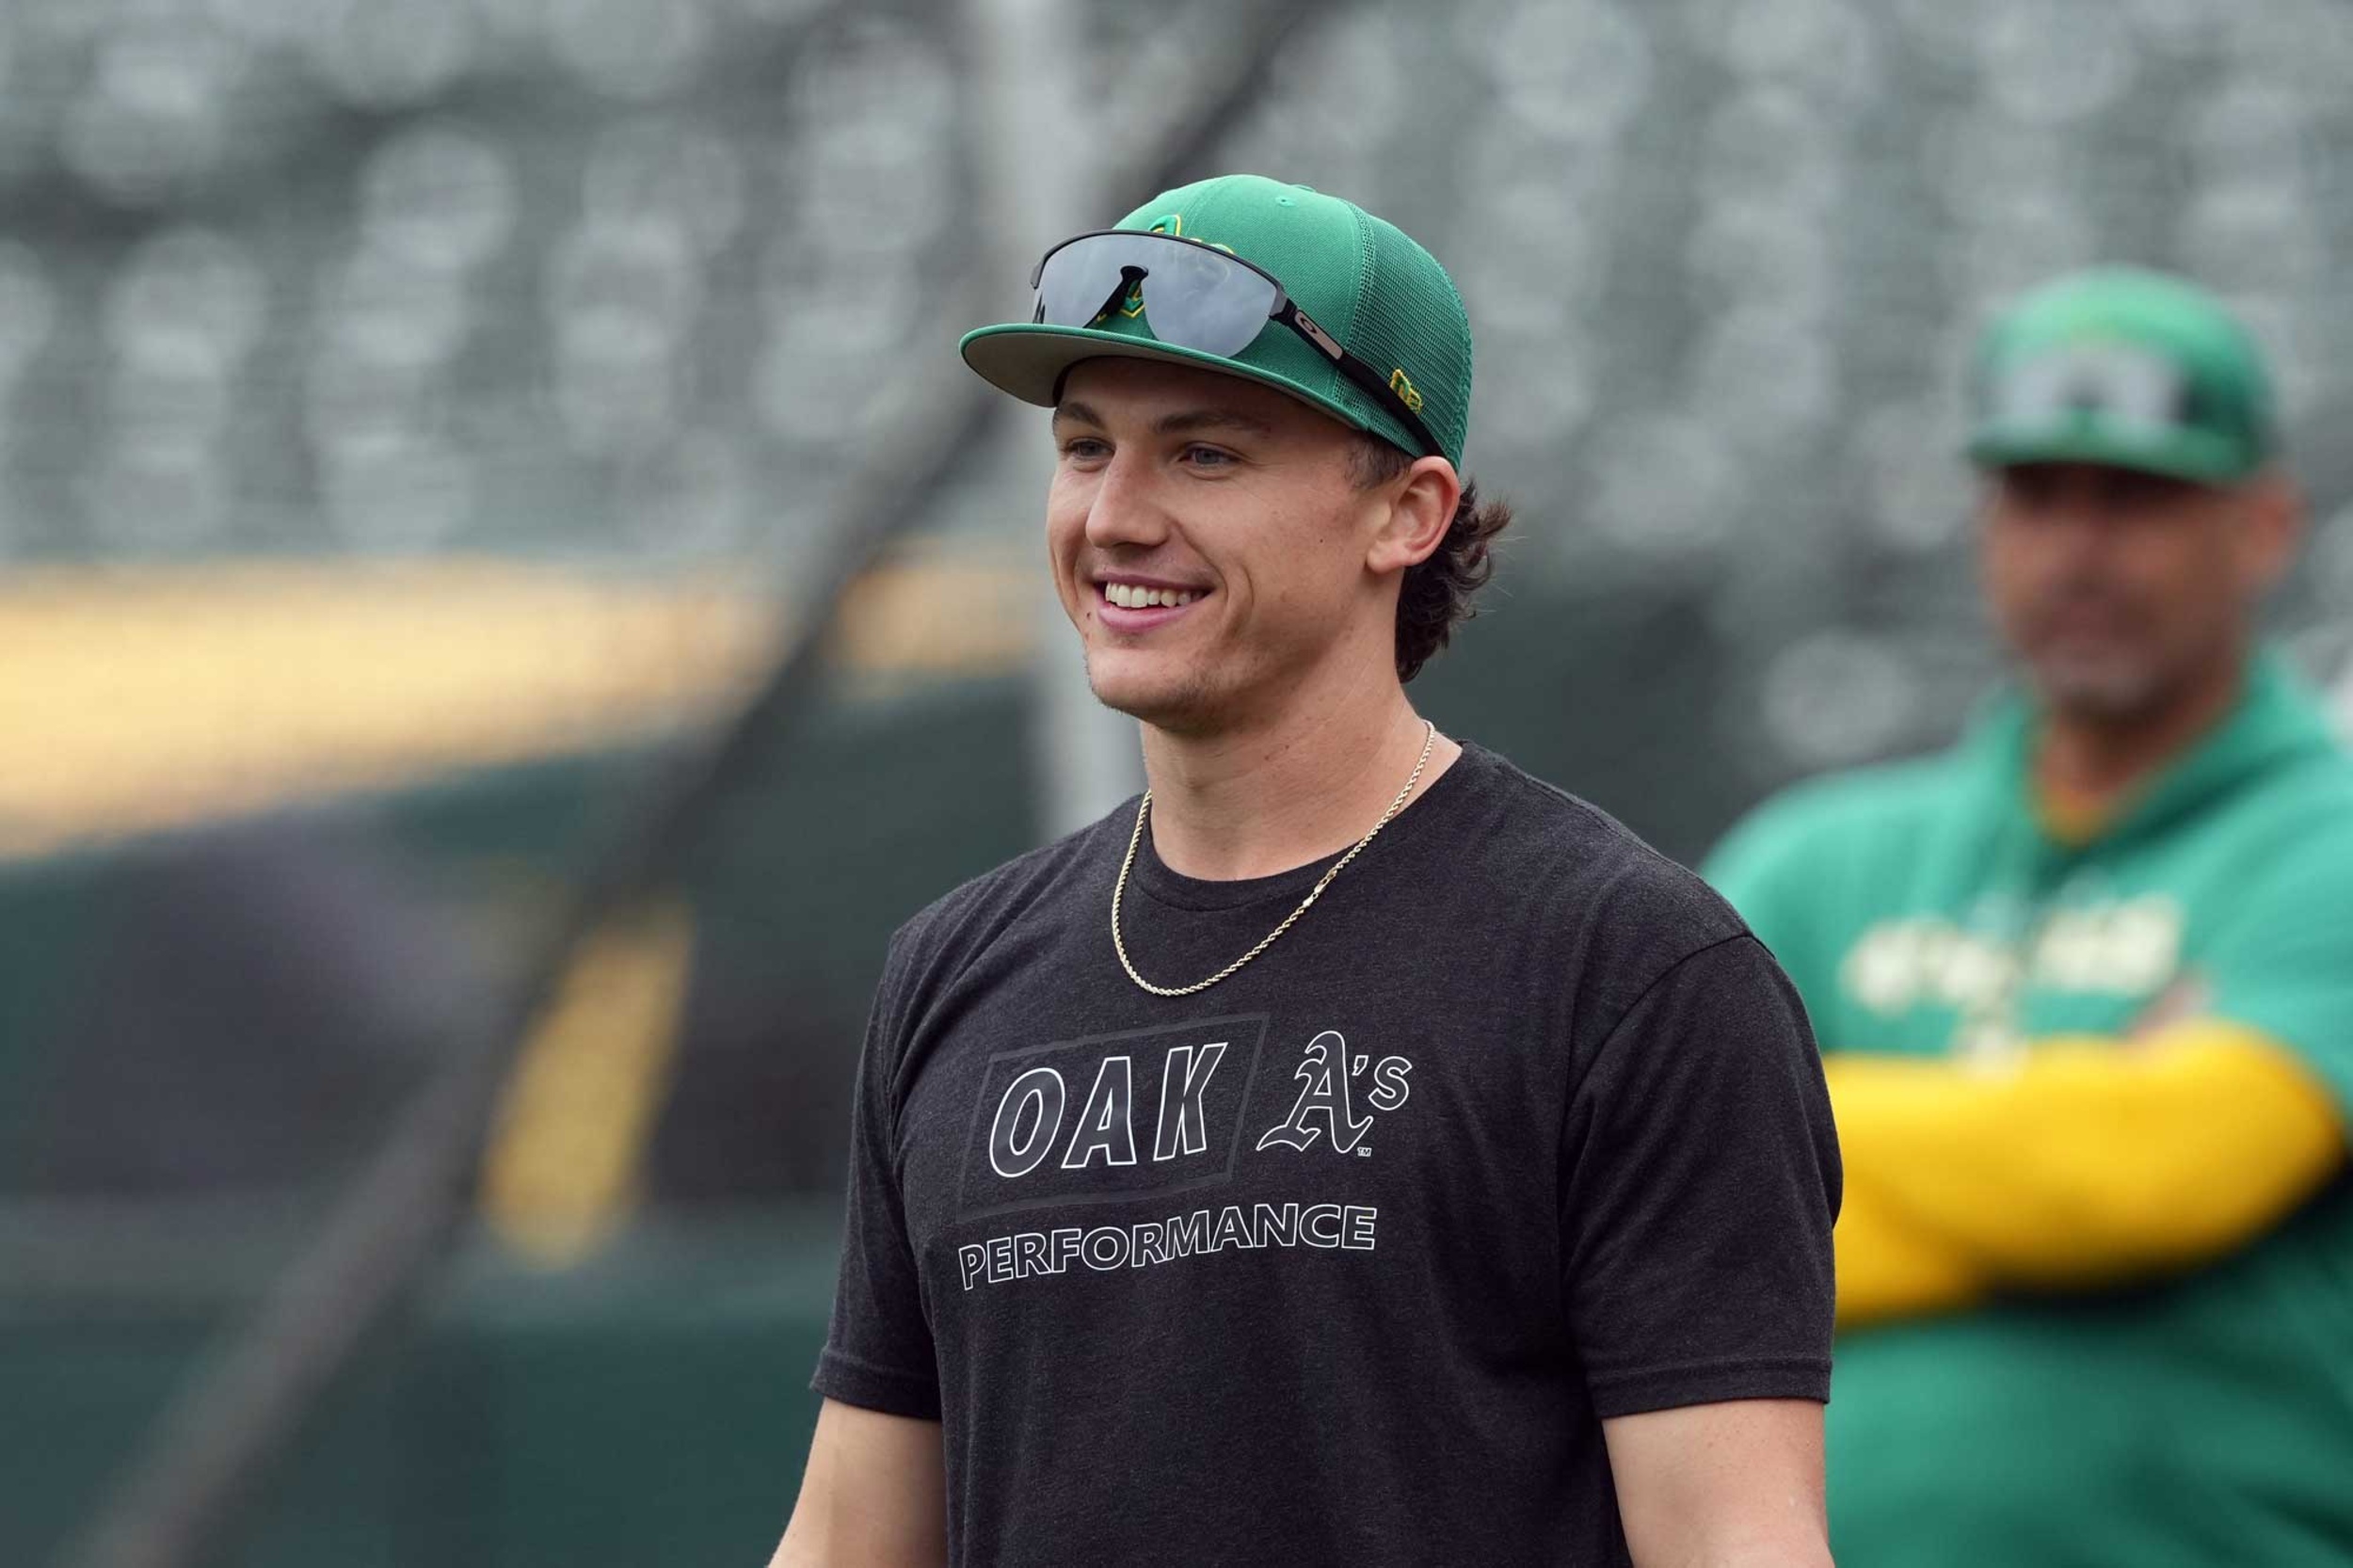 <p>There aren't many foundational pieces on the A's roster, but Gelof appears to be an exception. He was an elite offensive performer upon his arrival last season and could give the team a glimpse of the future with a full campaign.</p><p><a href='https://www.msn.com/en-us/community/channel/vid-cj9pqbr0vn9in2b6ddcd8sfgpfq6x6utp44fssrv6mc2gtybw0us'>Follow us on MSN to see more of our exclusive MLB content.</a></p>